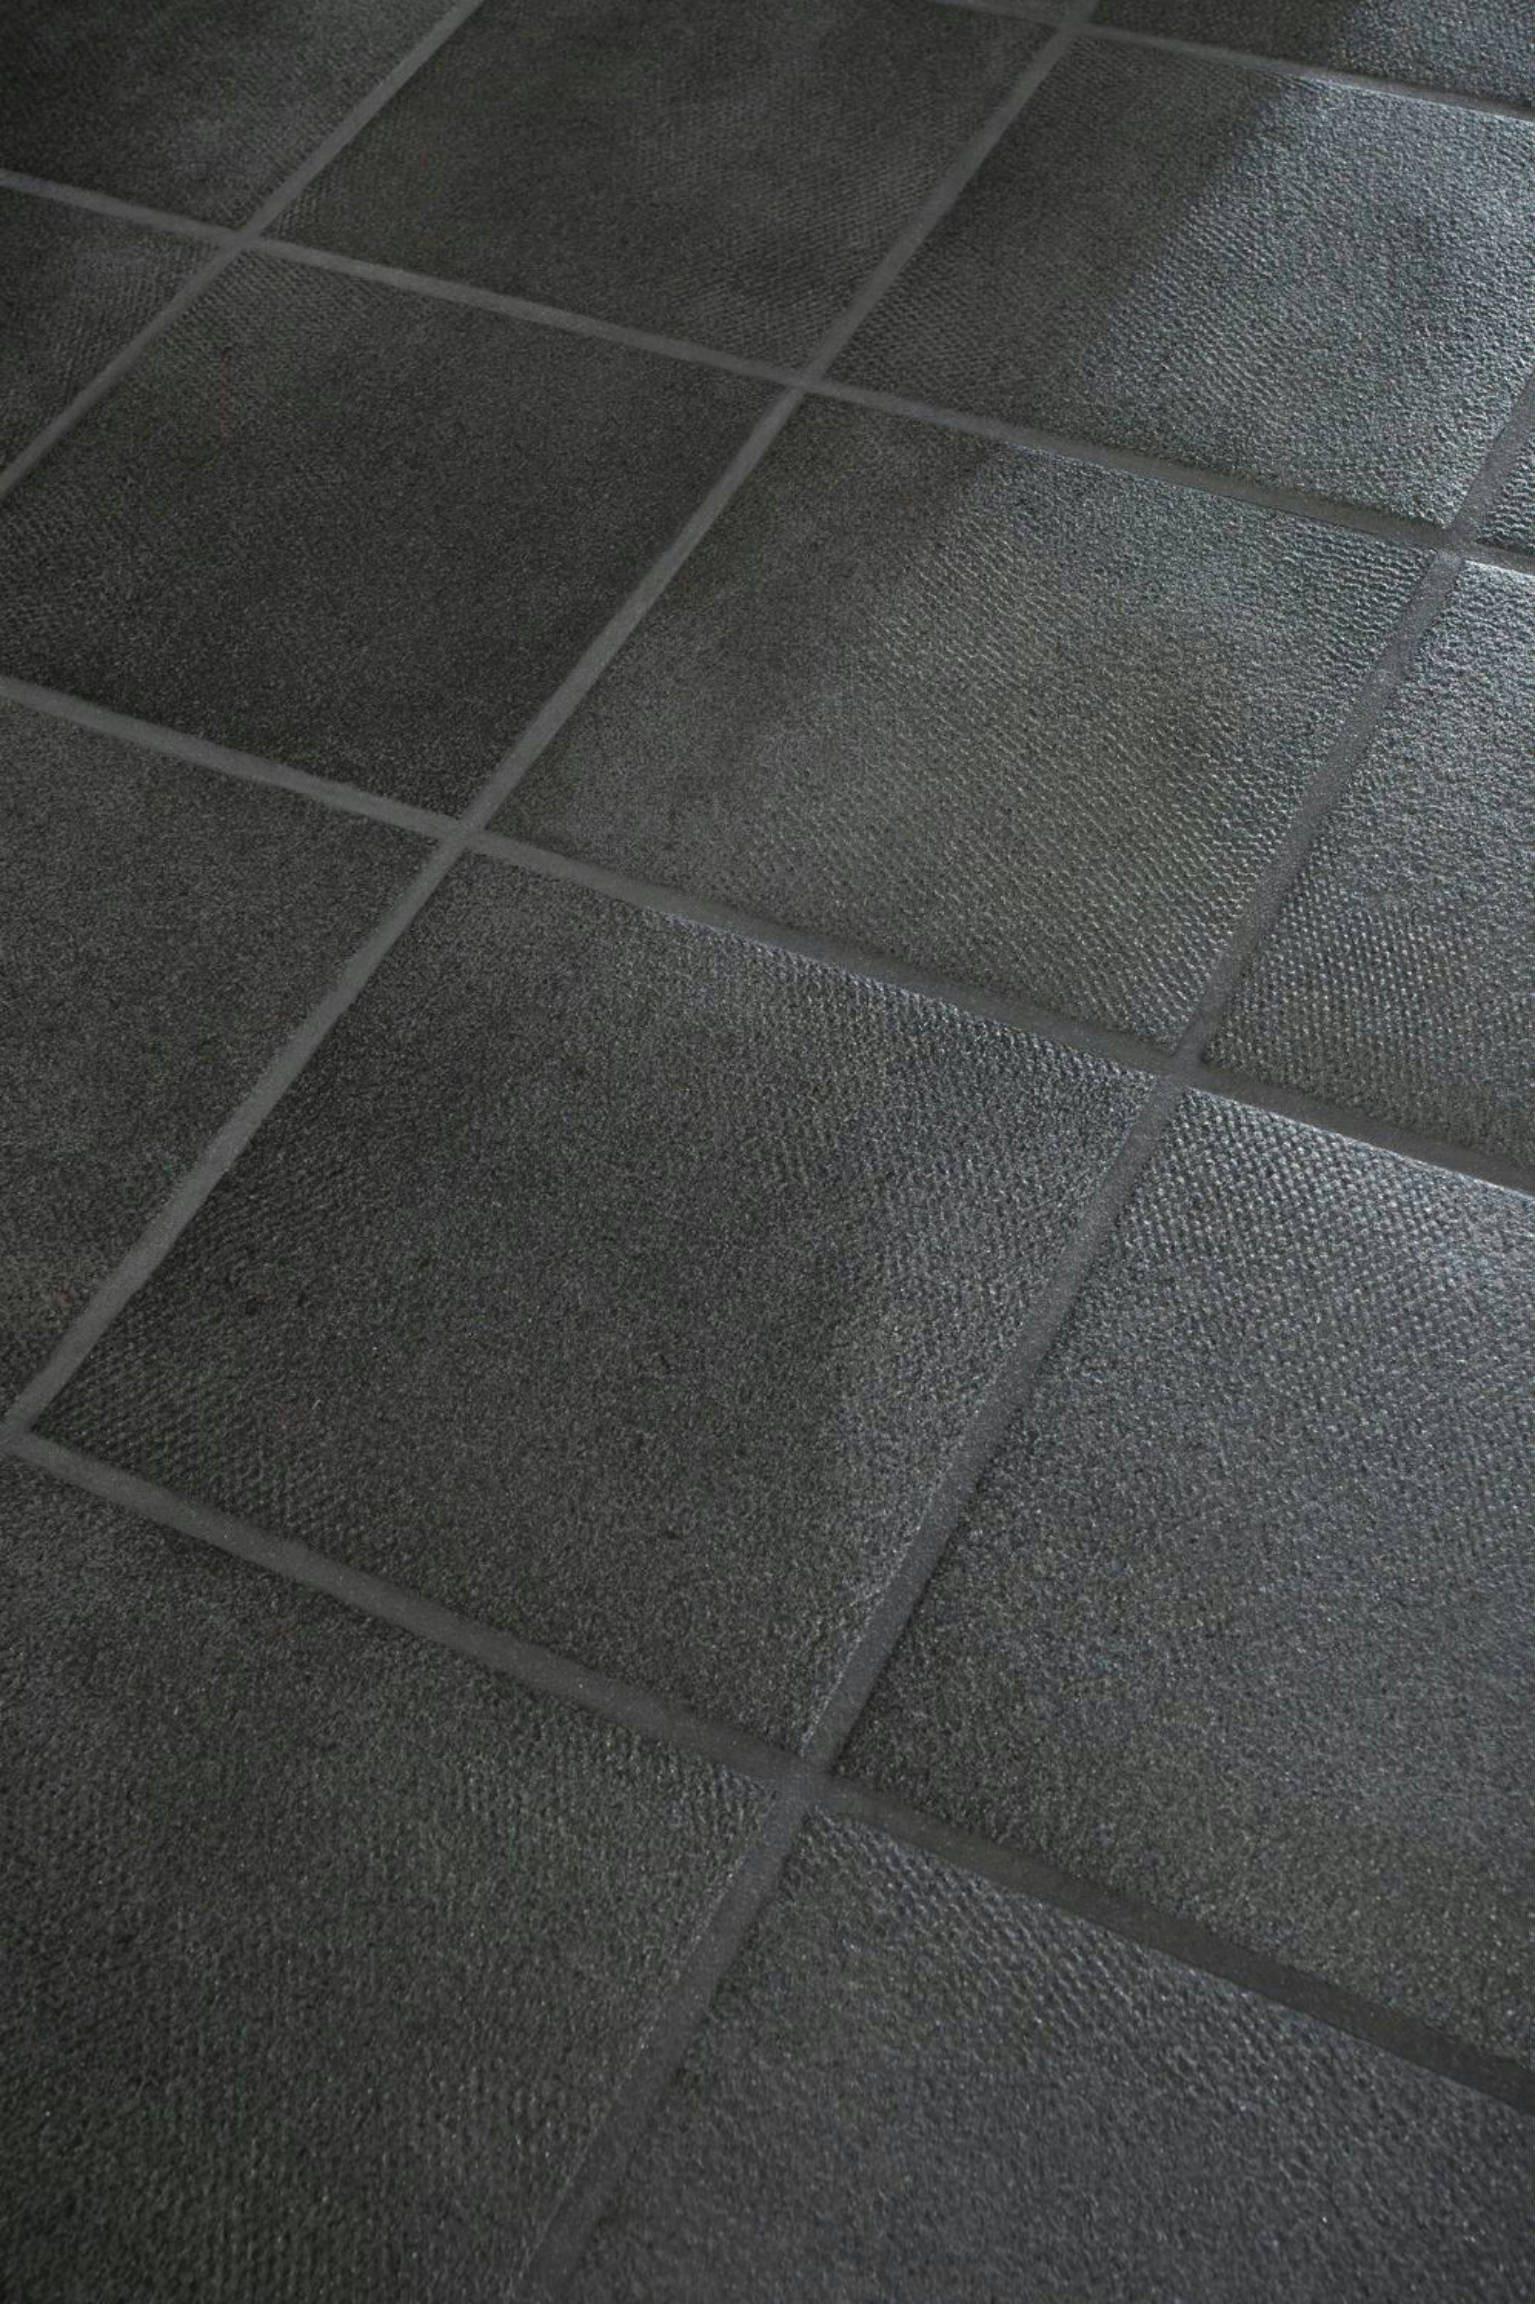 Soul Black | Stones And More | Finest selection of Mosaics, Glass, Tile and Stone